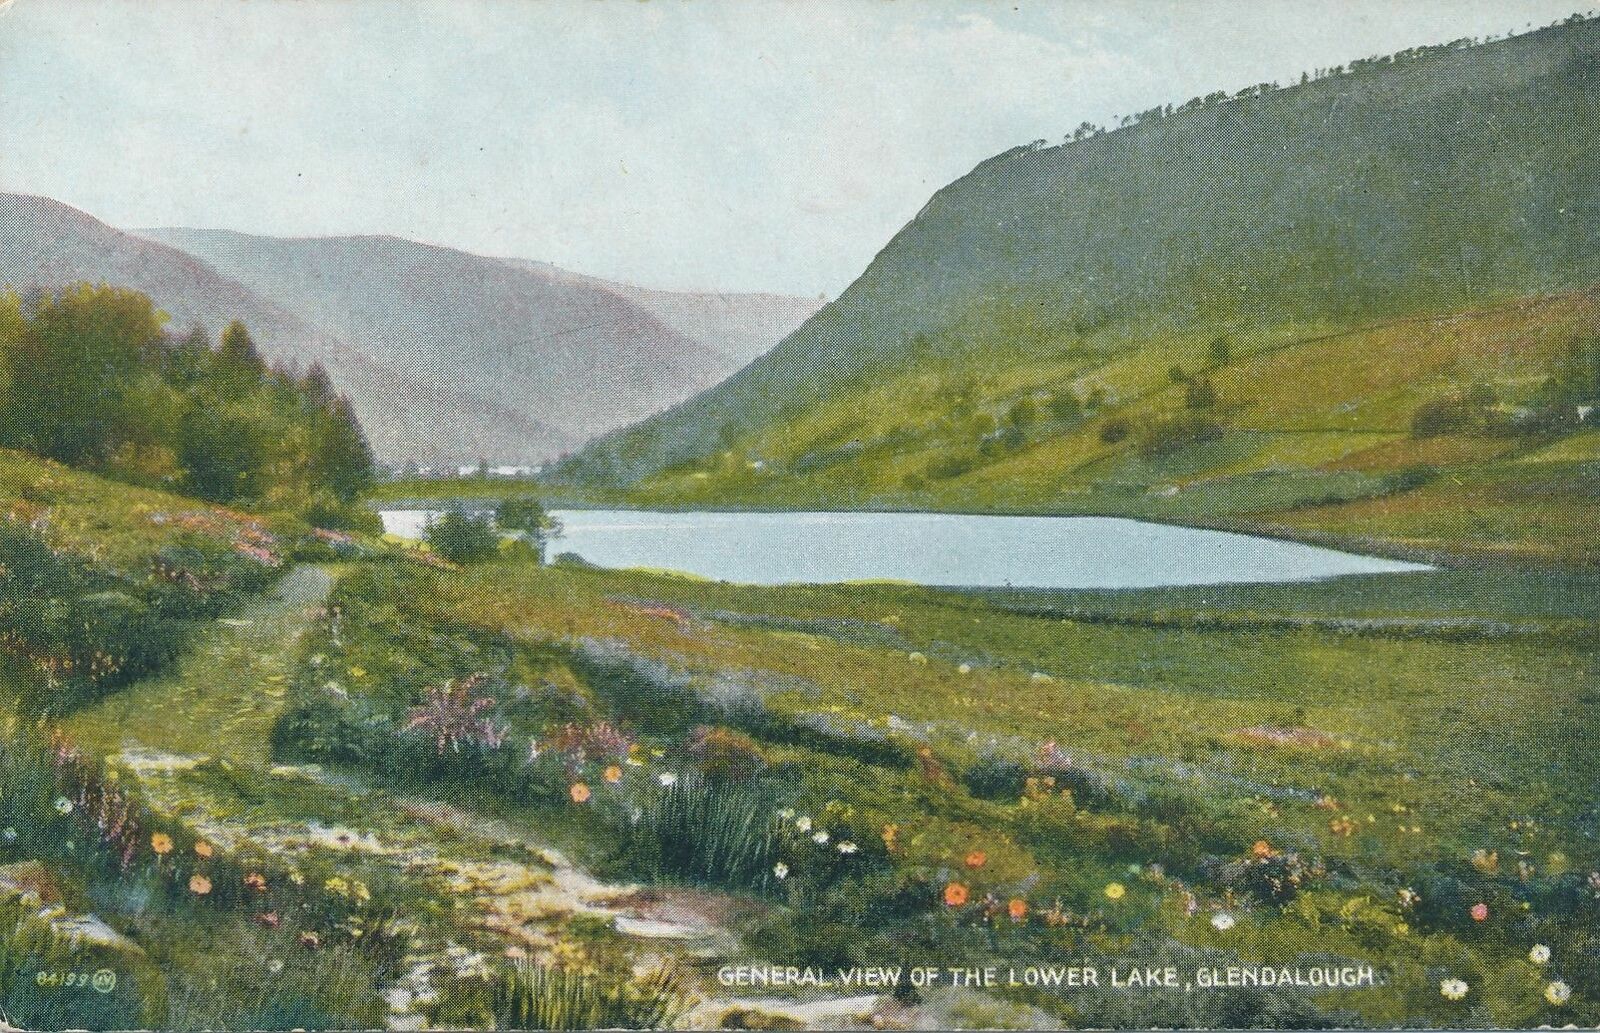 GLENDALOUGH - The Lower Lake General View - County Wicklow - Ireland